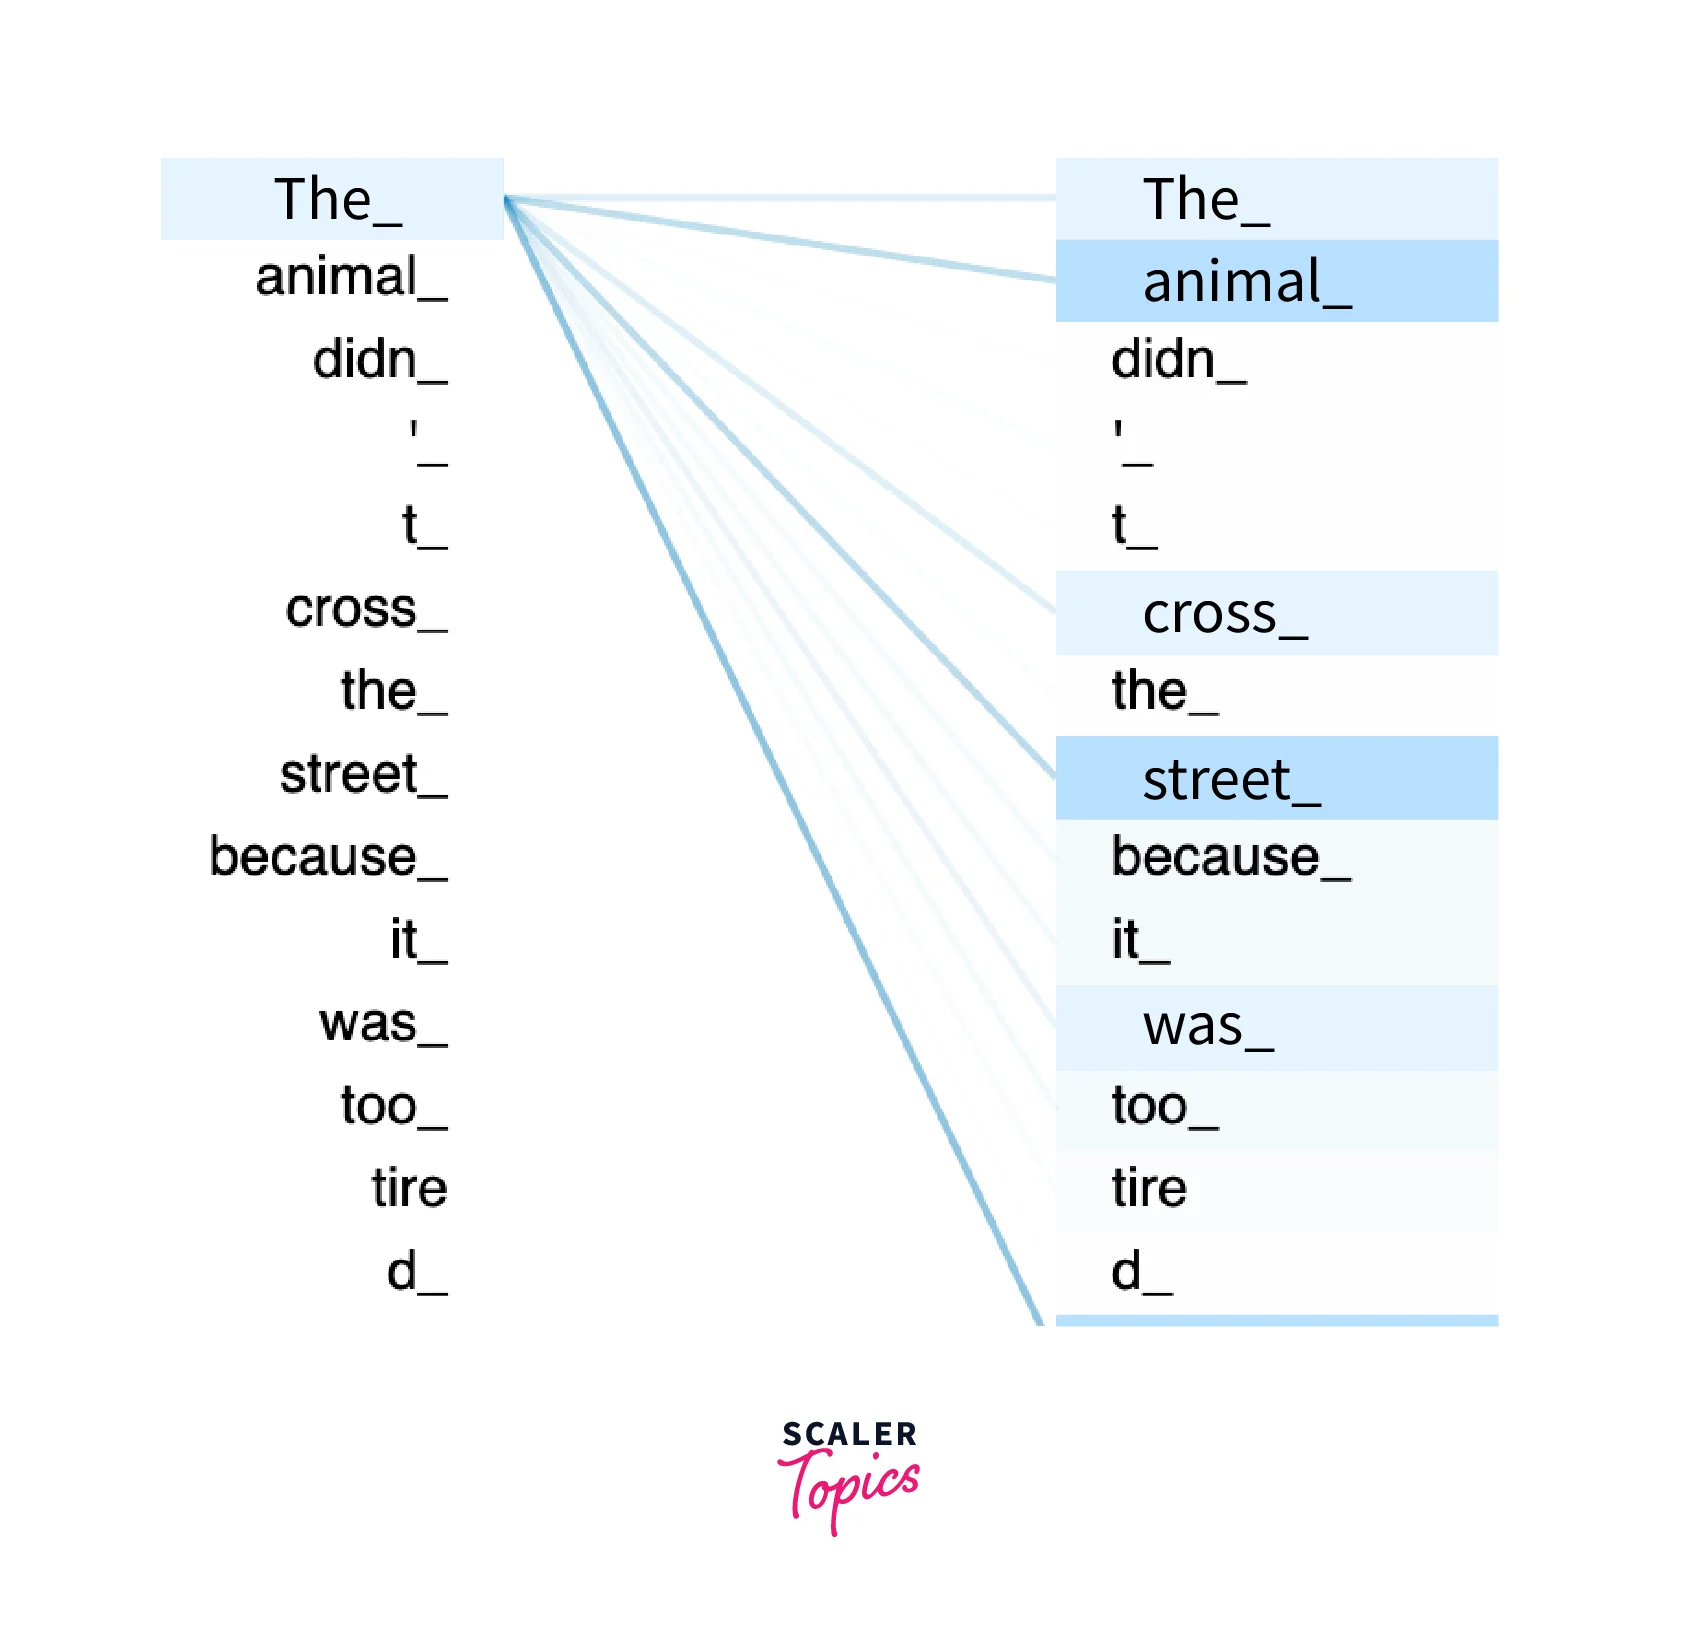 Illustration for how all the words in a sentence are utilized in attention model.